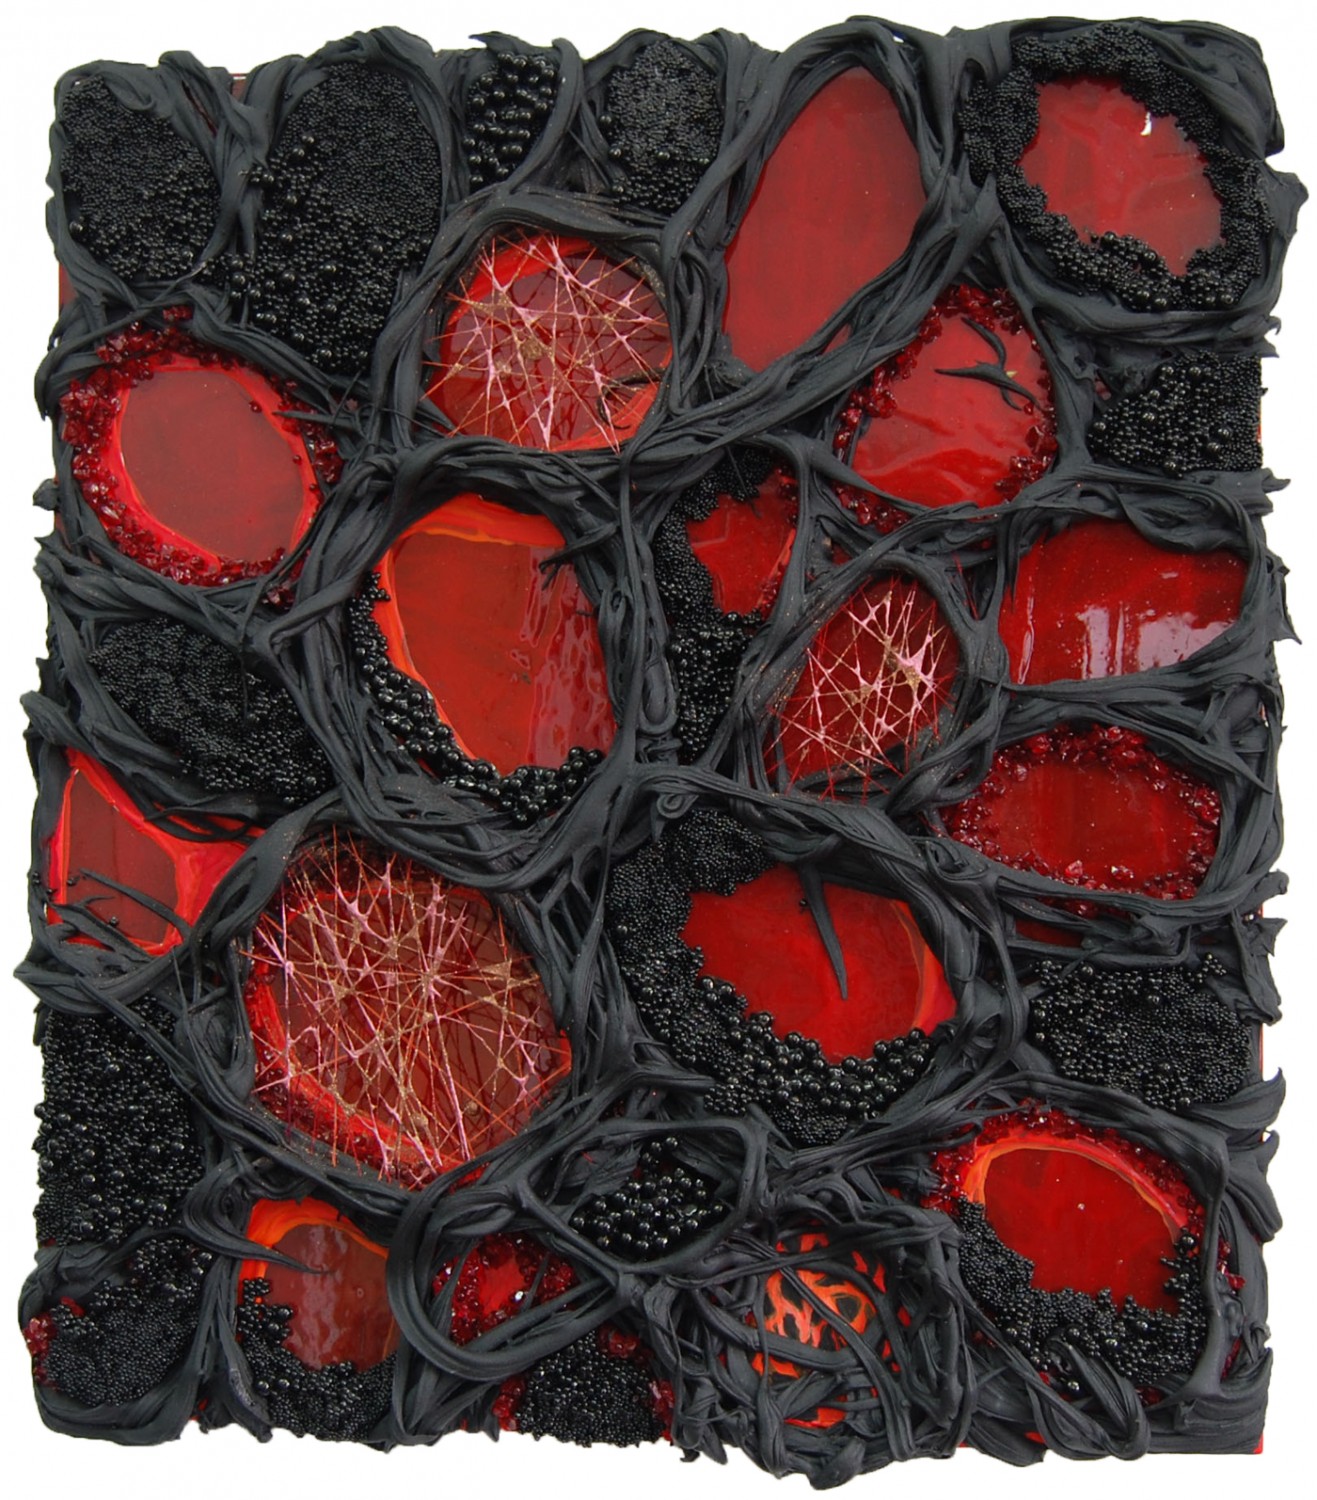 Gestating Geodes, 2010, Ultralight, urethane, pigment dispersions, glass beads and thread on panel